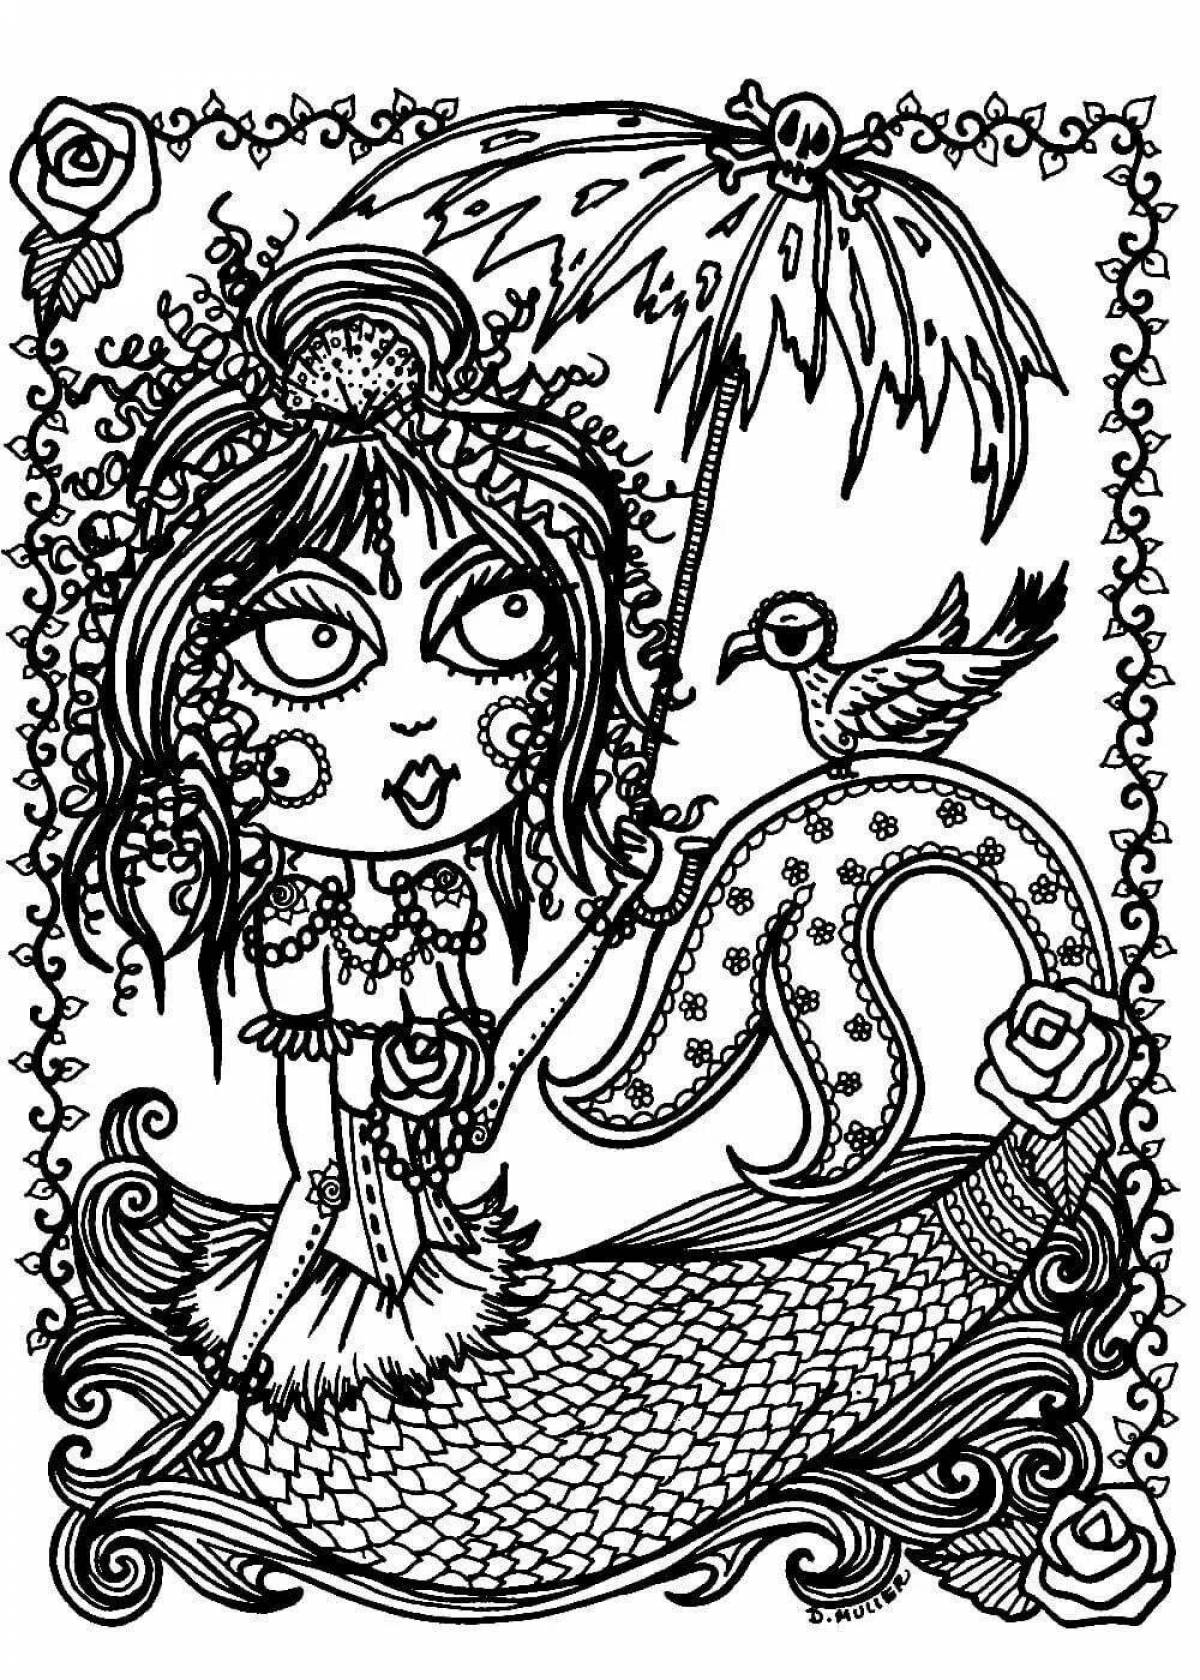 Fabulous coloring pages of a witch from Slavic myths